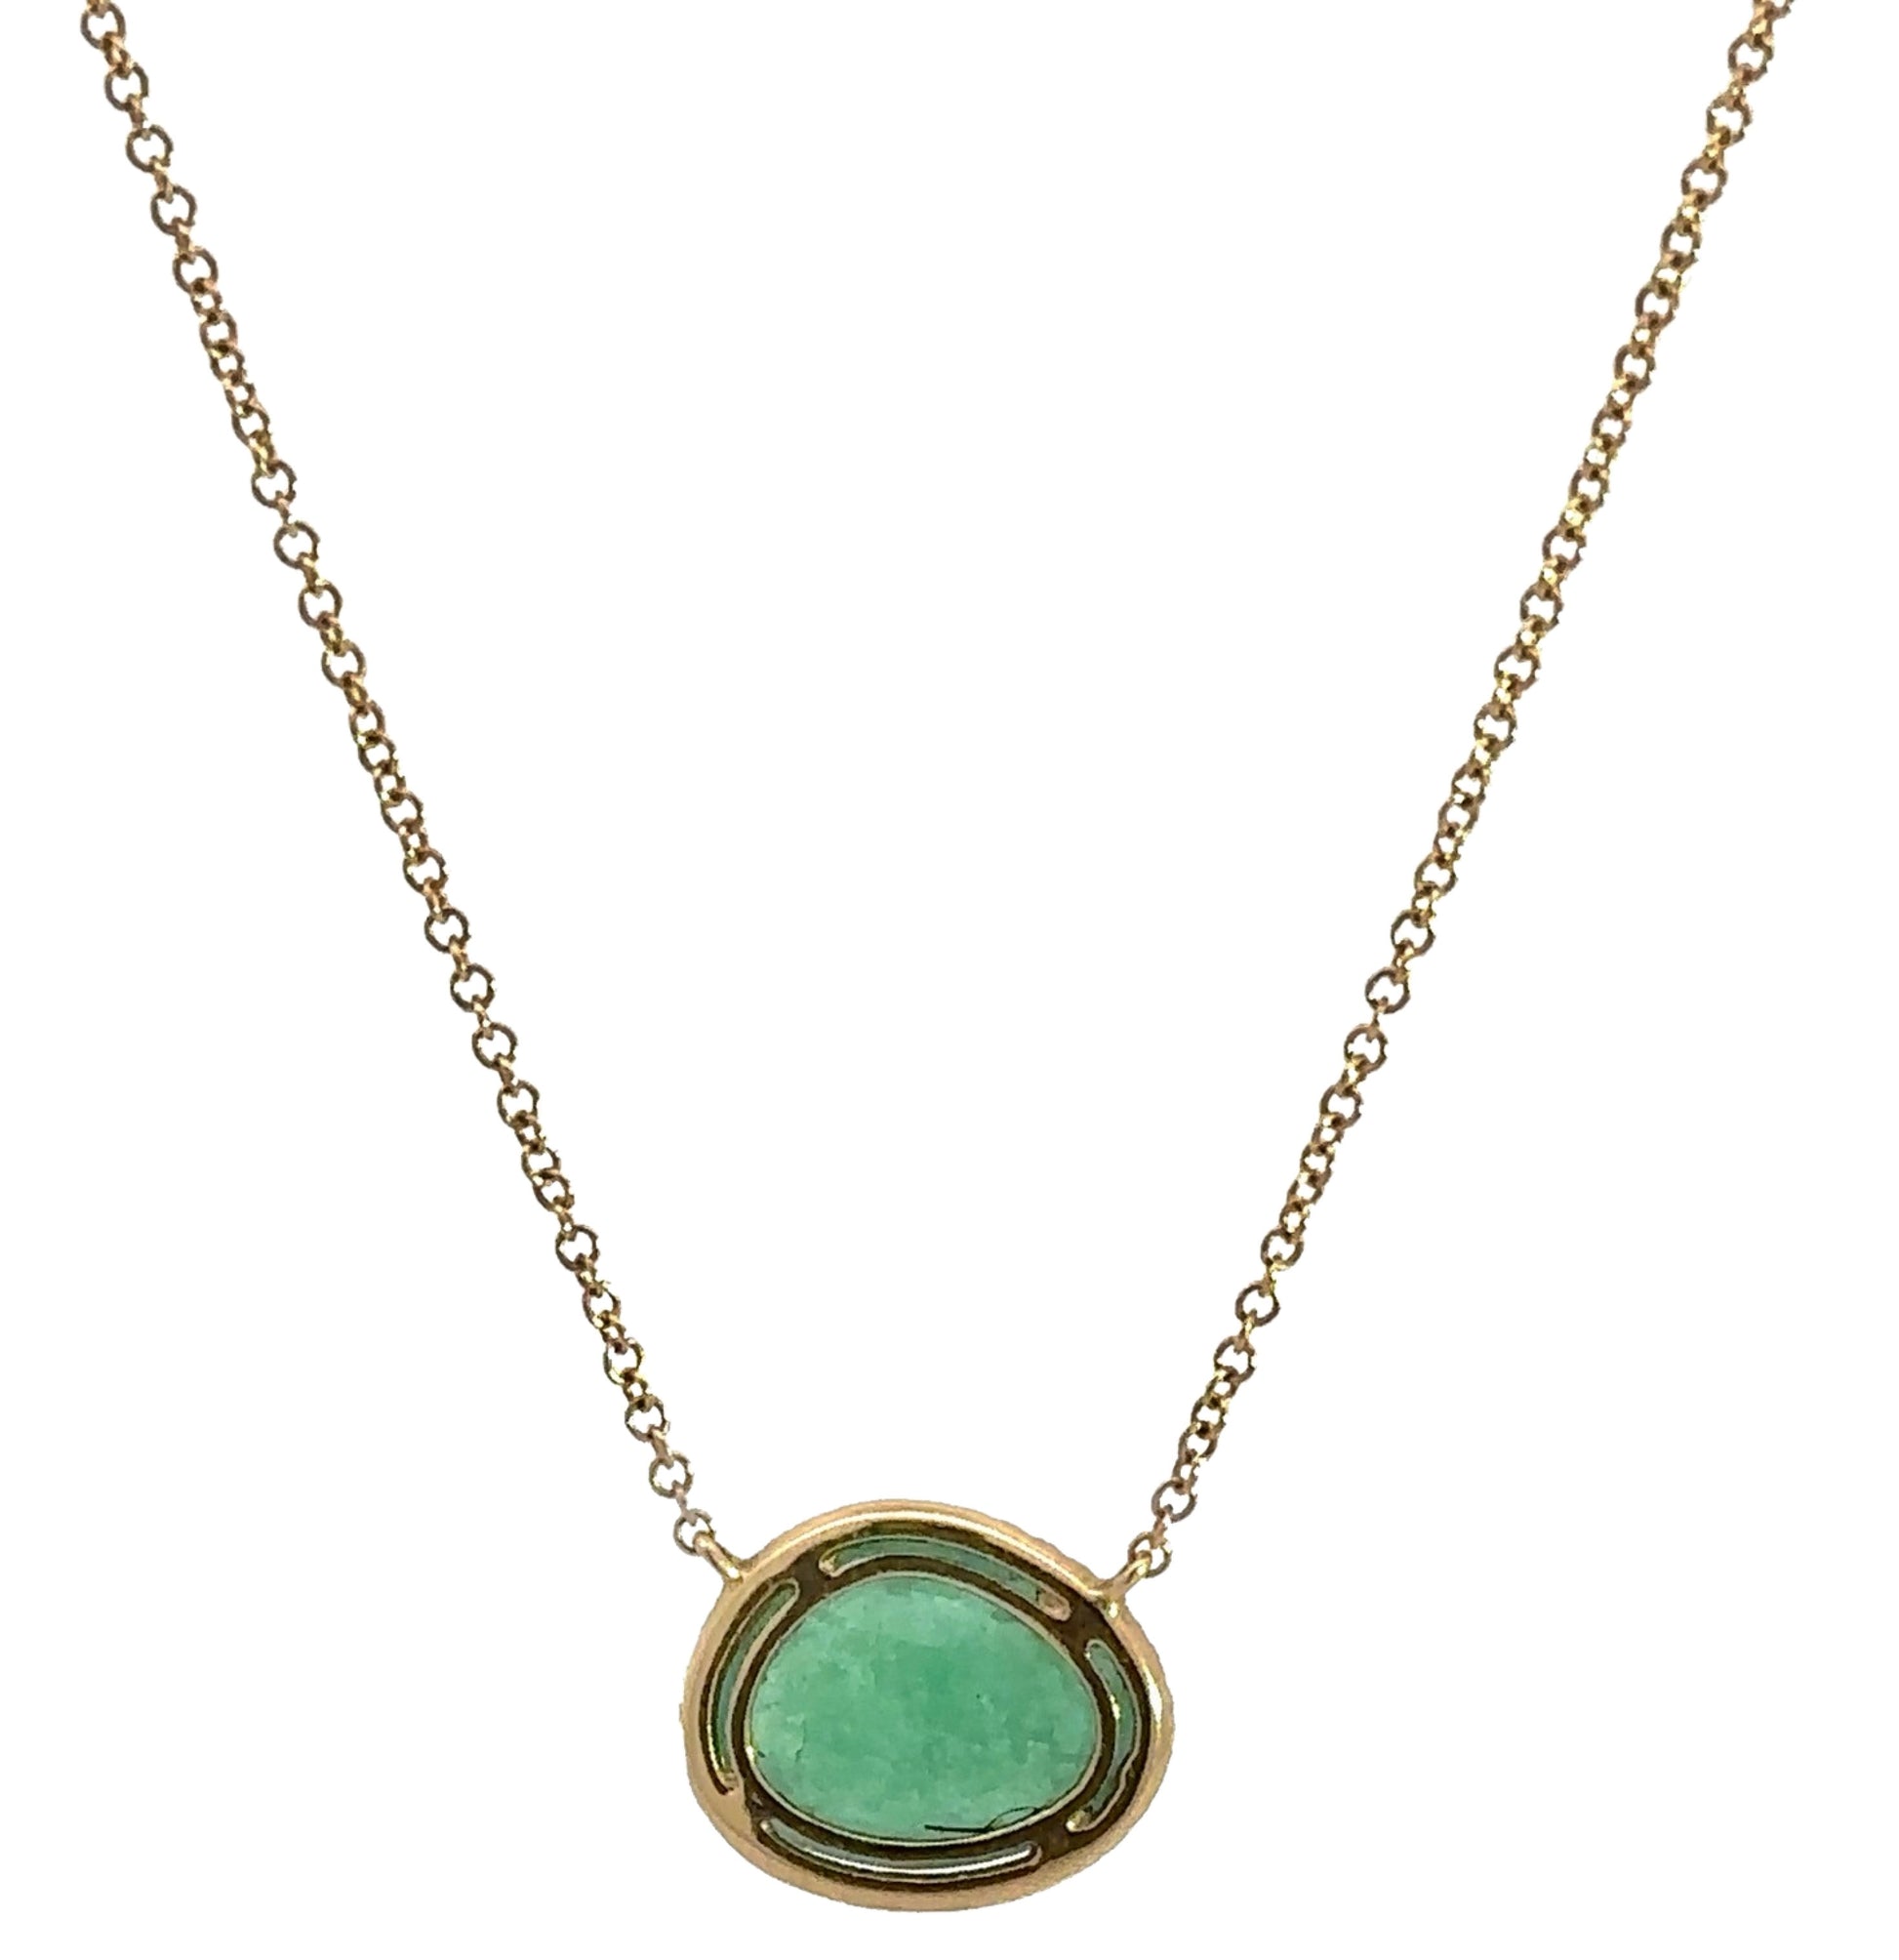 back of necklace with yellow gold surrounding free-form emerald